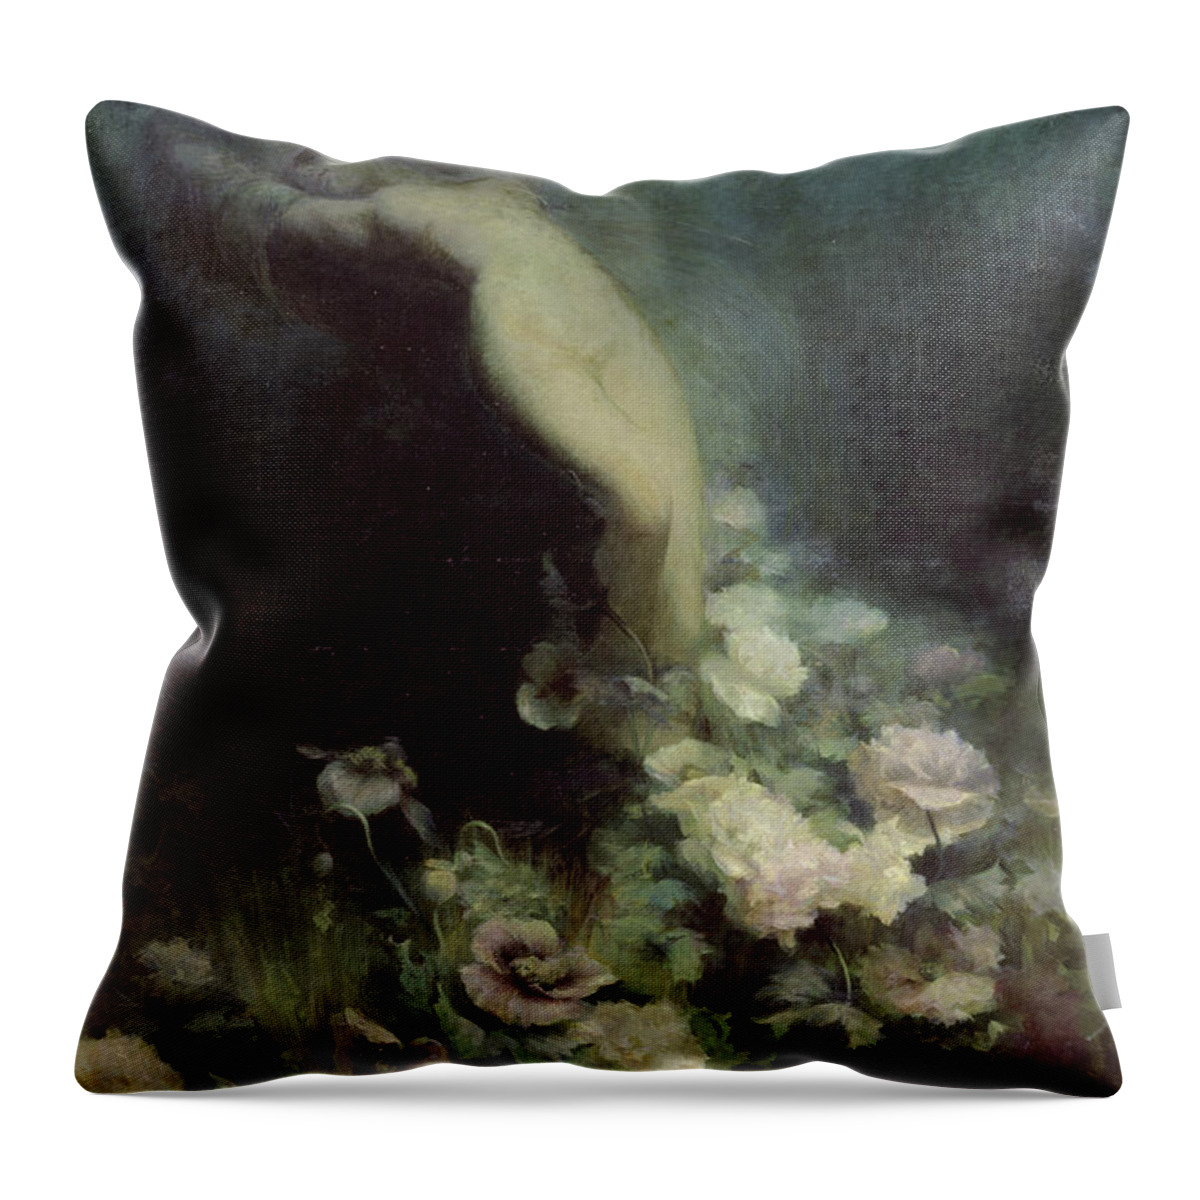 Flowers Of Sleep Throw Pillow featuring the painting Les Fleurs du Sommeil by Achille Theodore Cesbron by Achille Theodore Cesbron